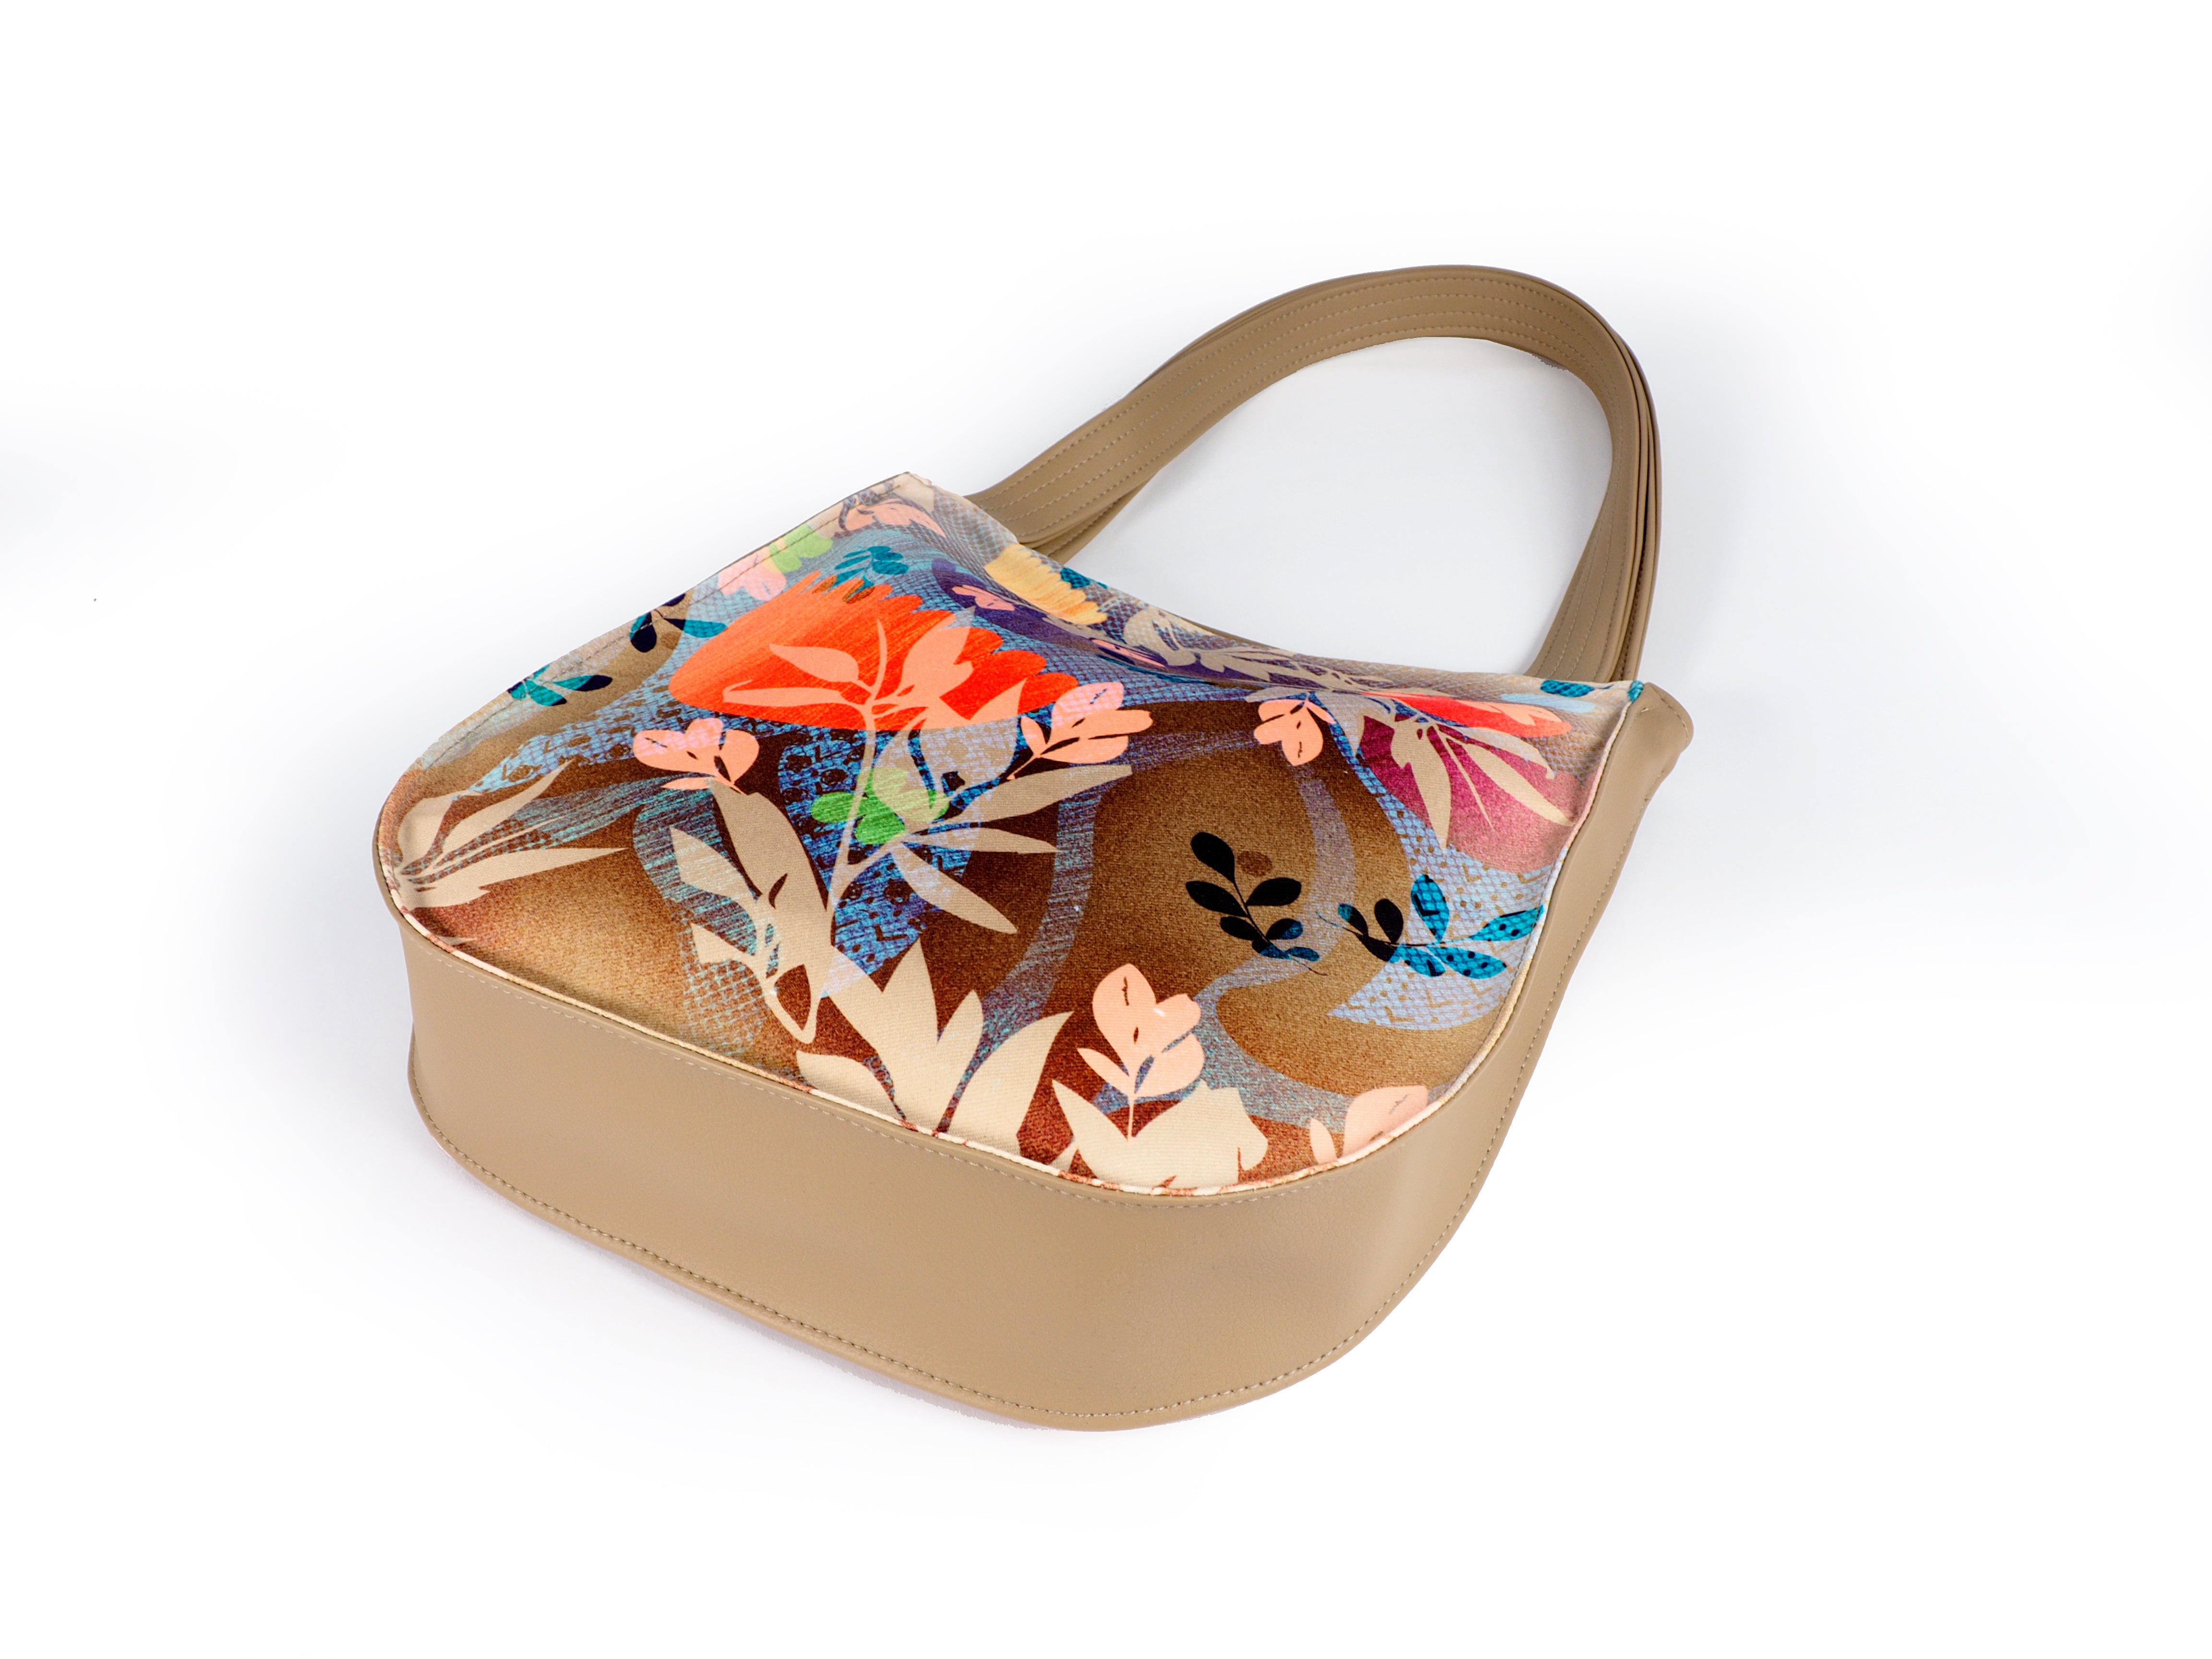 Bardo style bag - Summer time - Premium style bag from BARDO ART WORKS - Just lvbeige, green, leaves, pink, red, Rosily, summer69.00! Shop now at BARDO ART WORKS